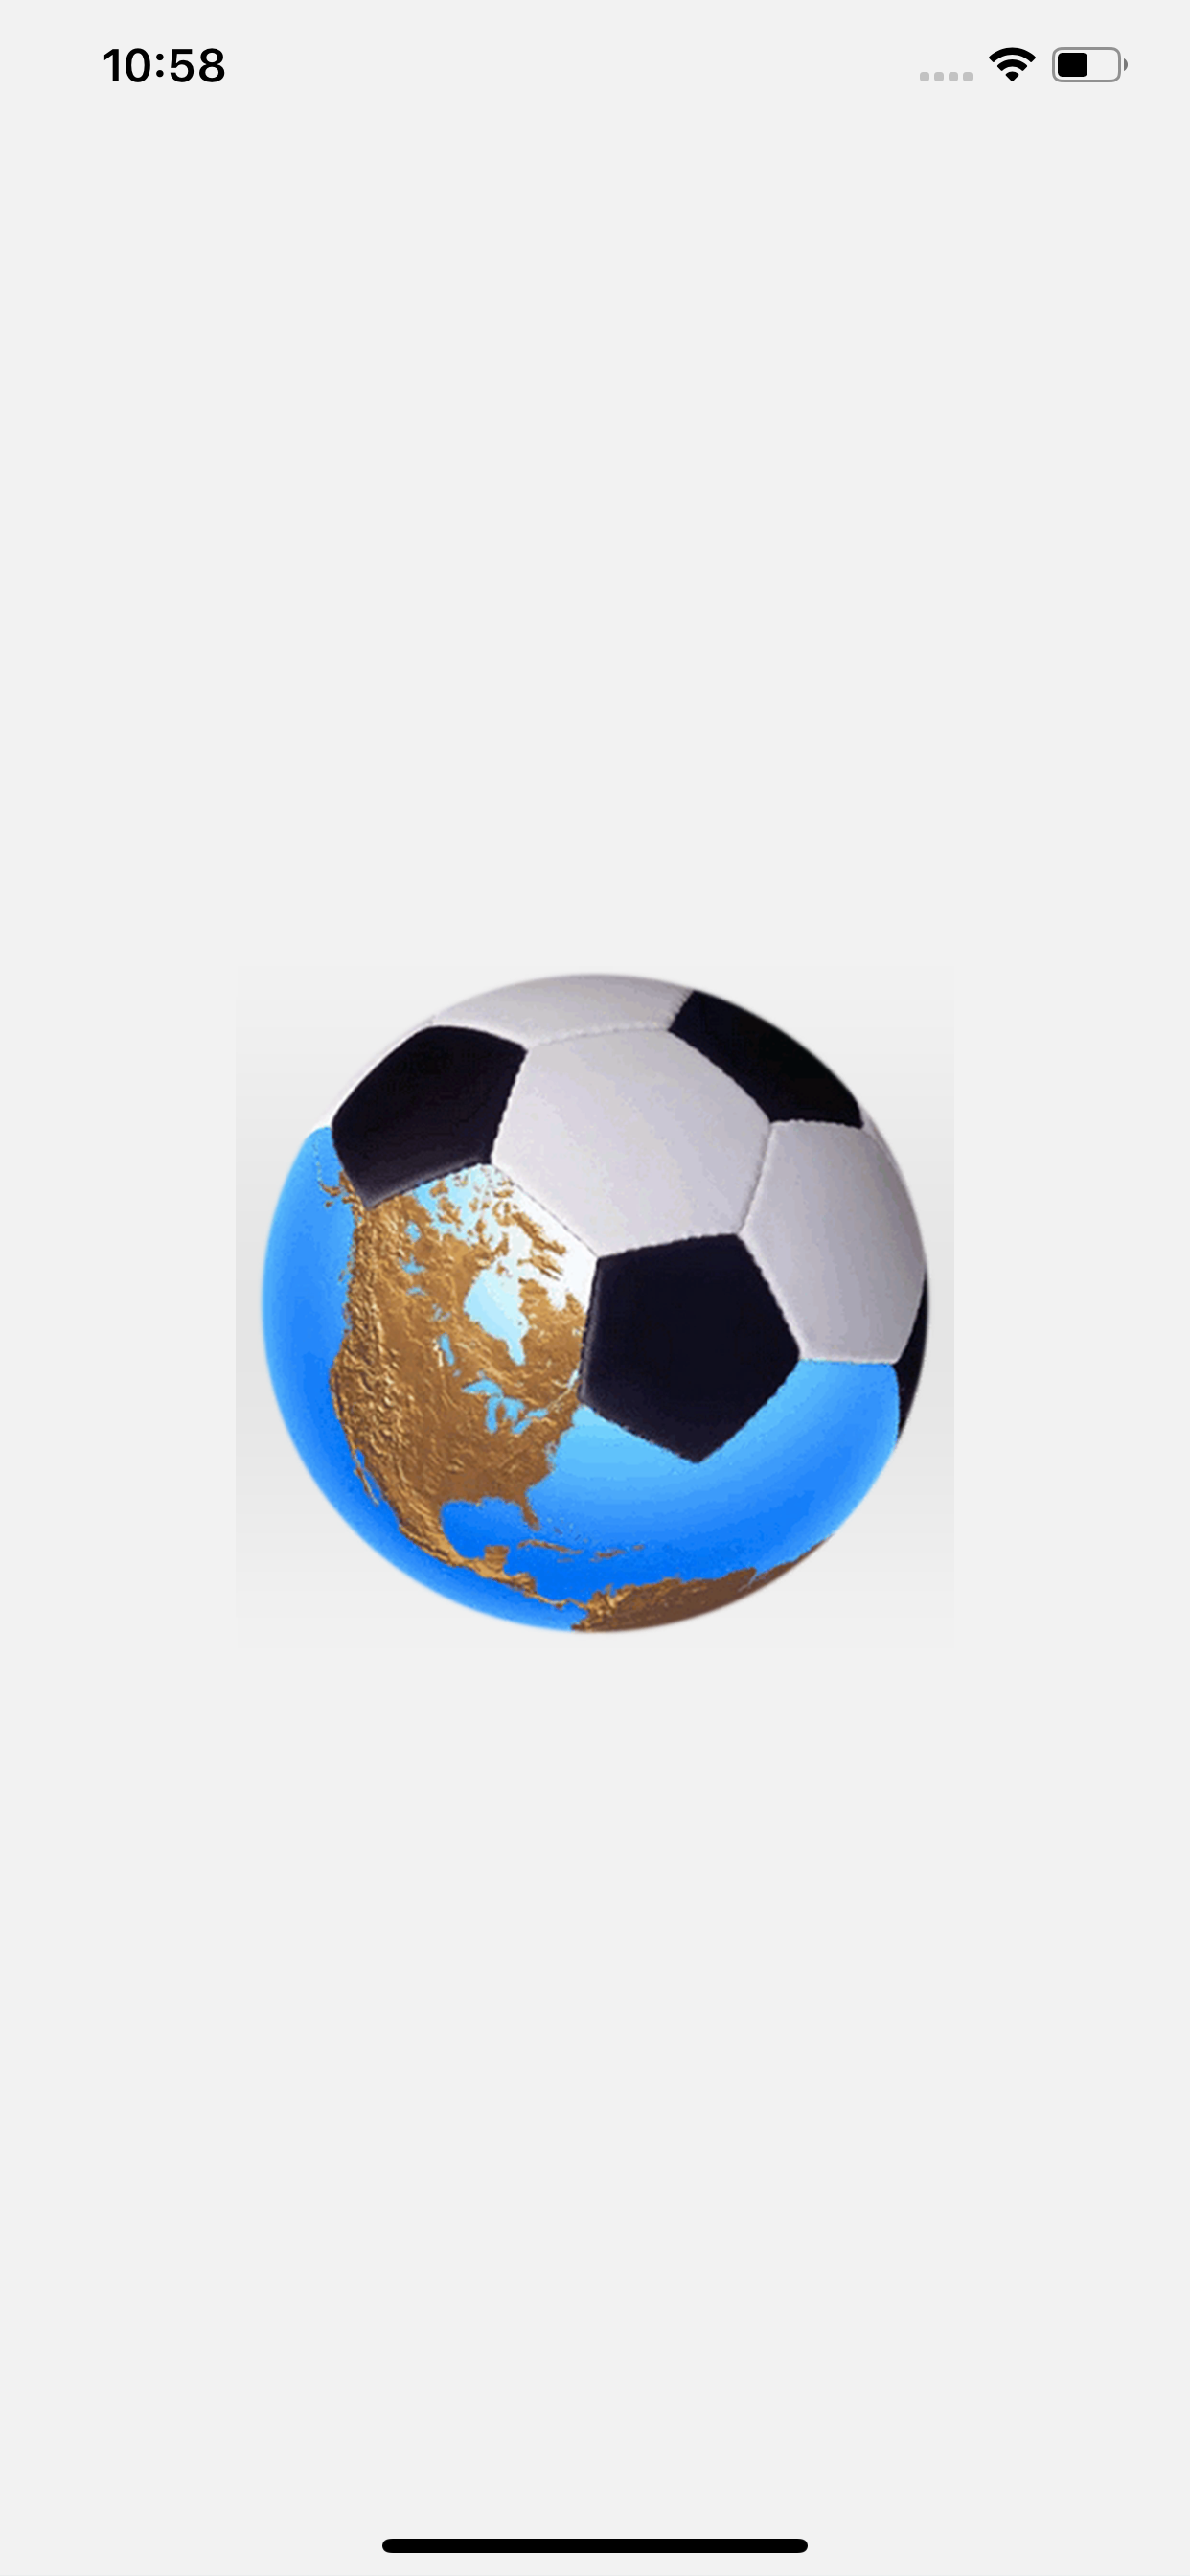 Top Sports Apps for Android on Google Play in Ghana · Appfigures